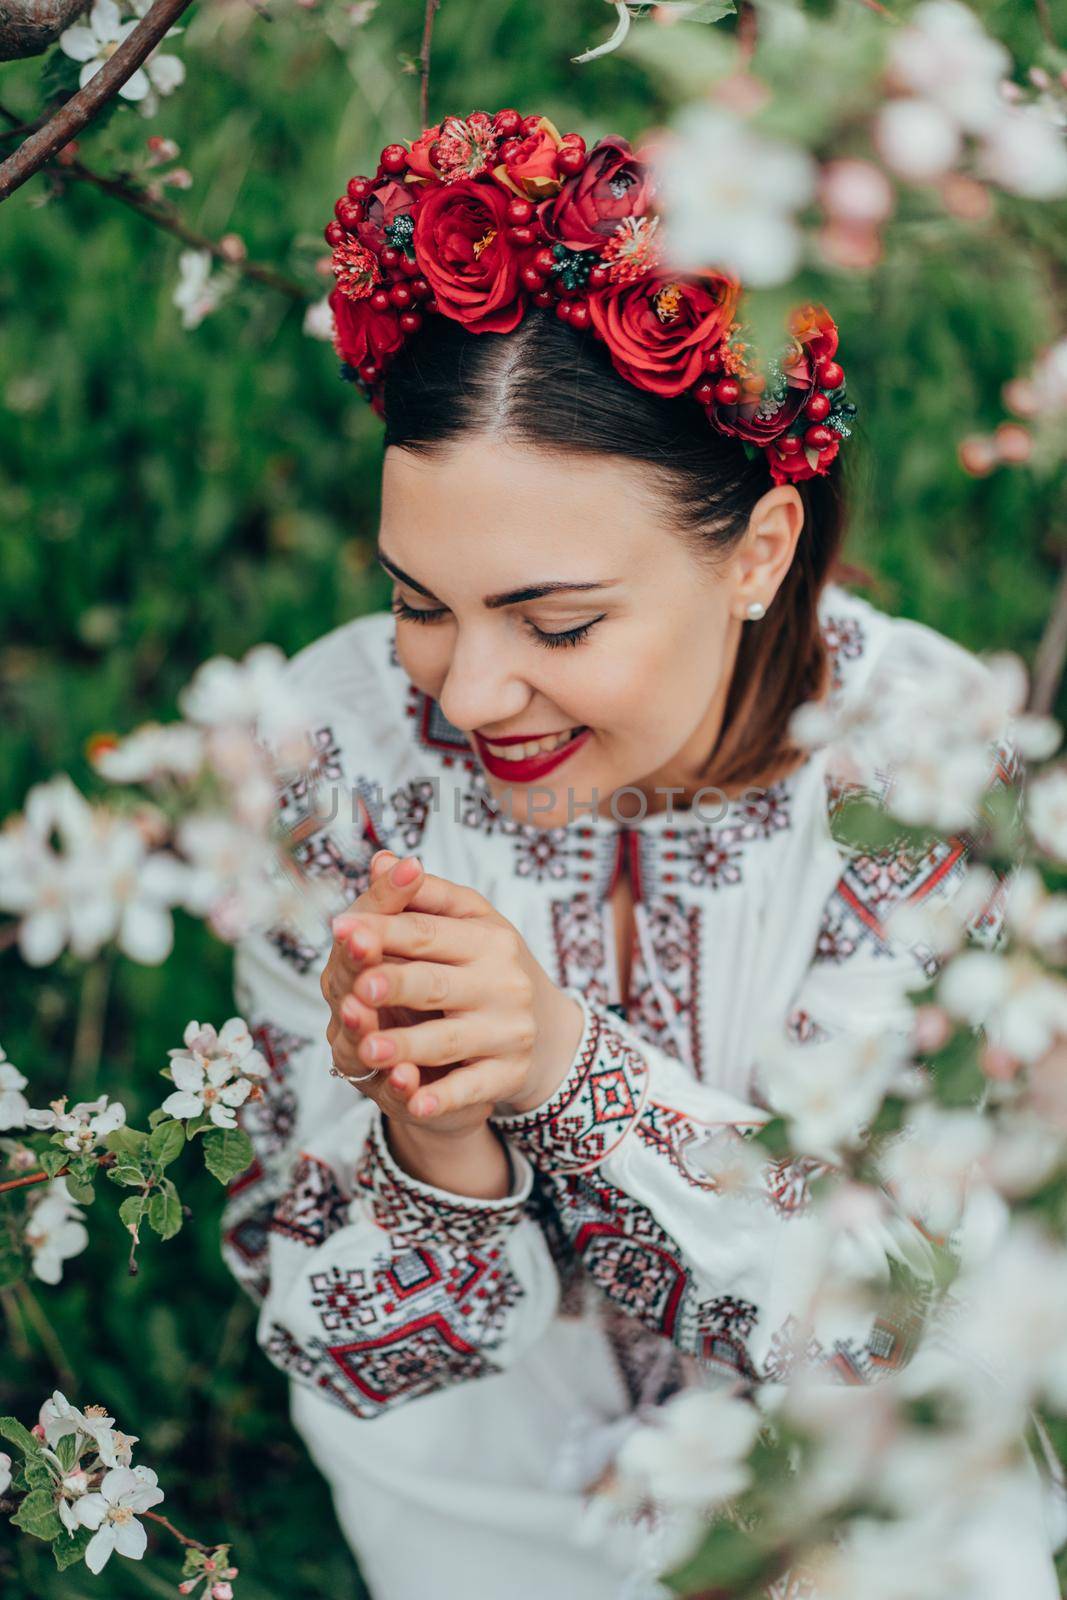 Attractive ukrainian woman in traditional embroidery vyshyvanka dress and red flowers wreath. Ukraine, freedom, culture, national costume, victory in war. High quality photo